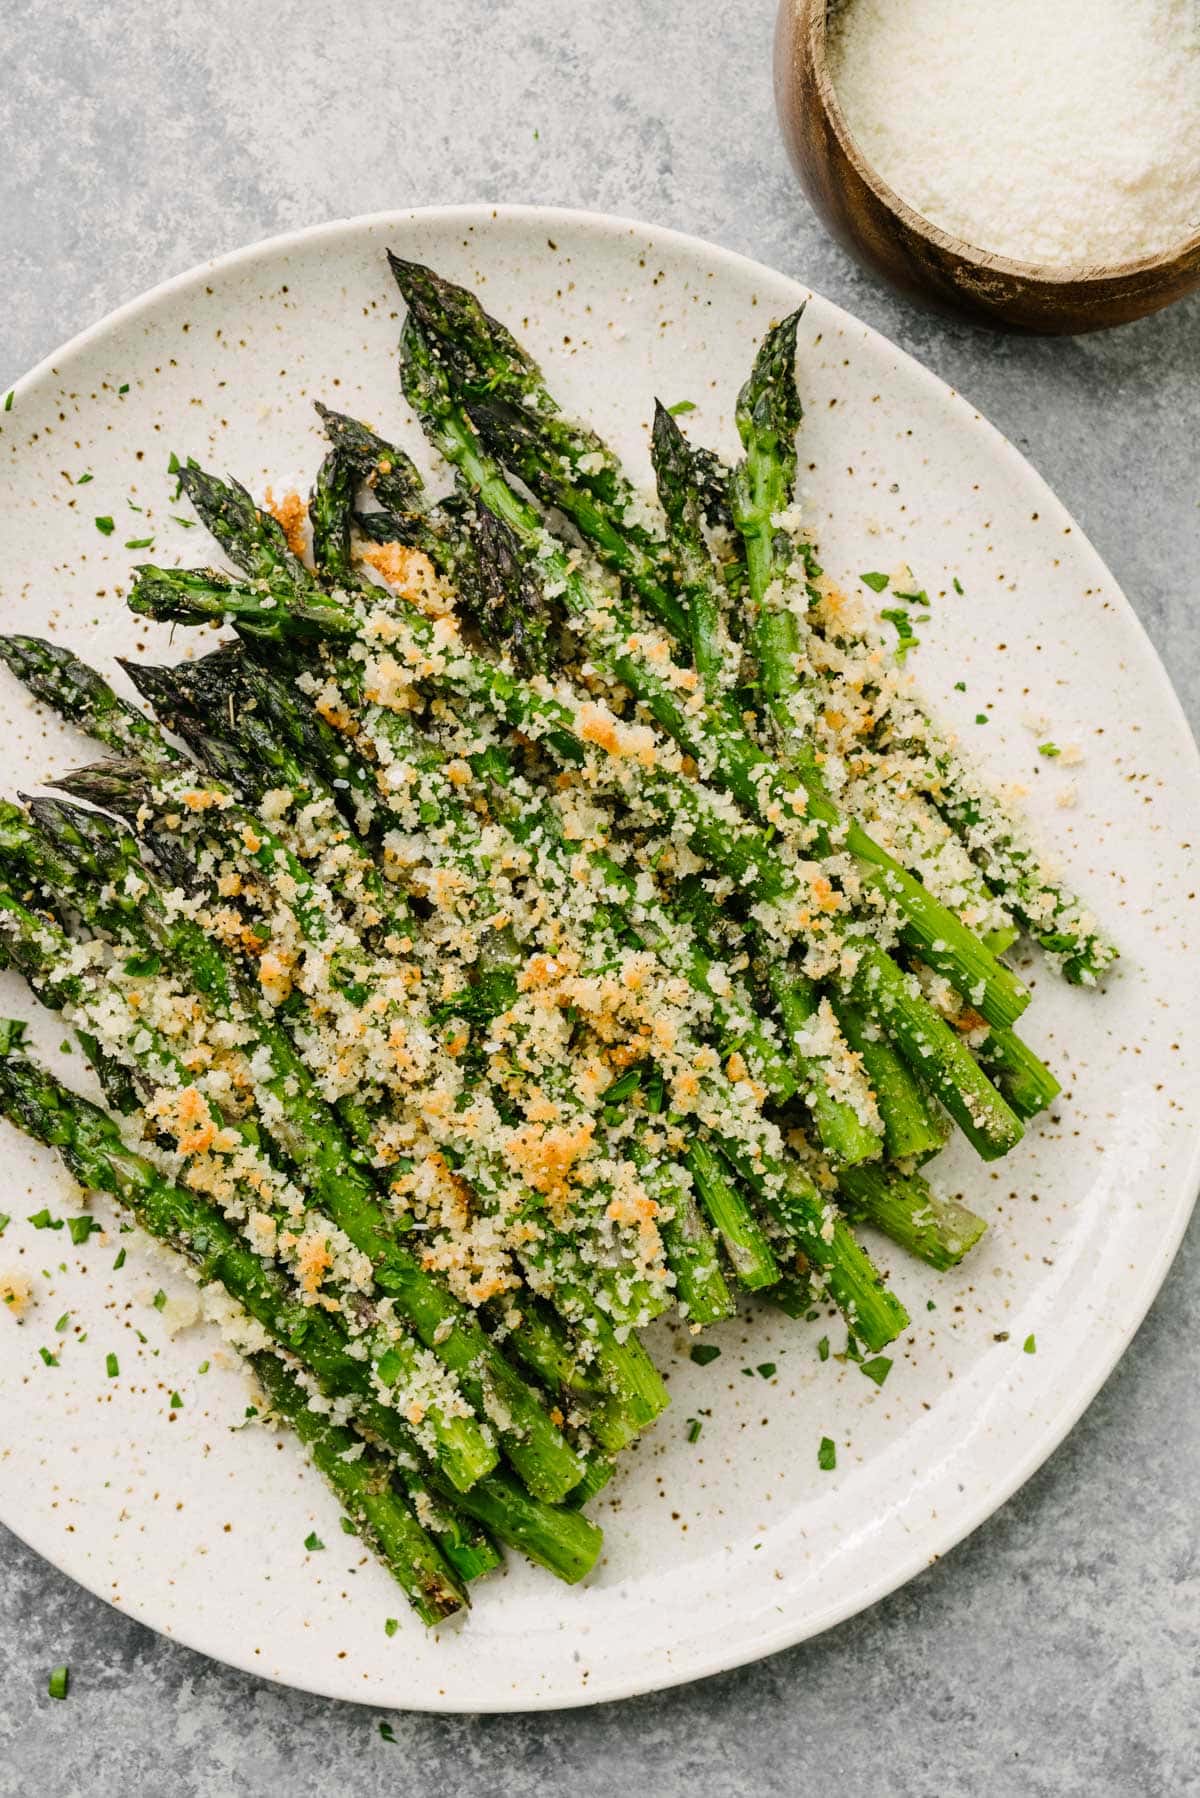 Roasted asparagus with parmesan on a brown speckled plate on a concrete background, with a small bowl of grated parmesan cheese to the side.